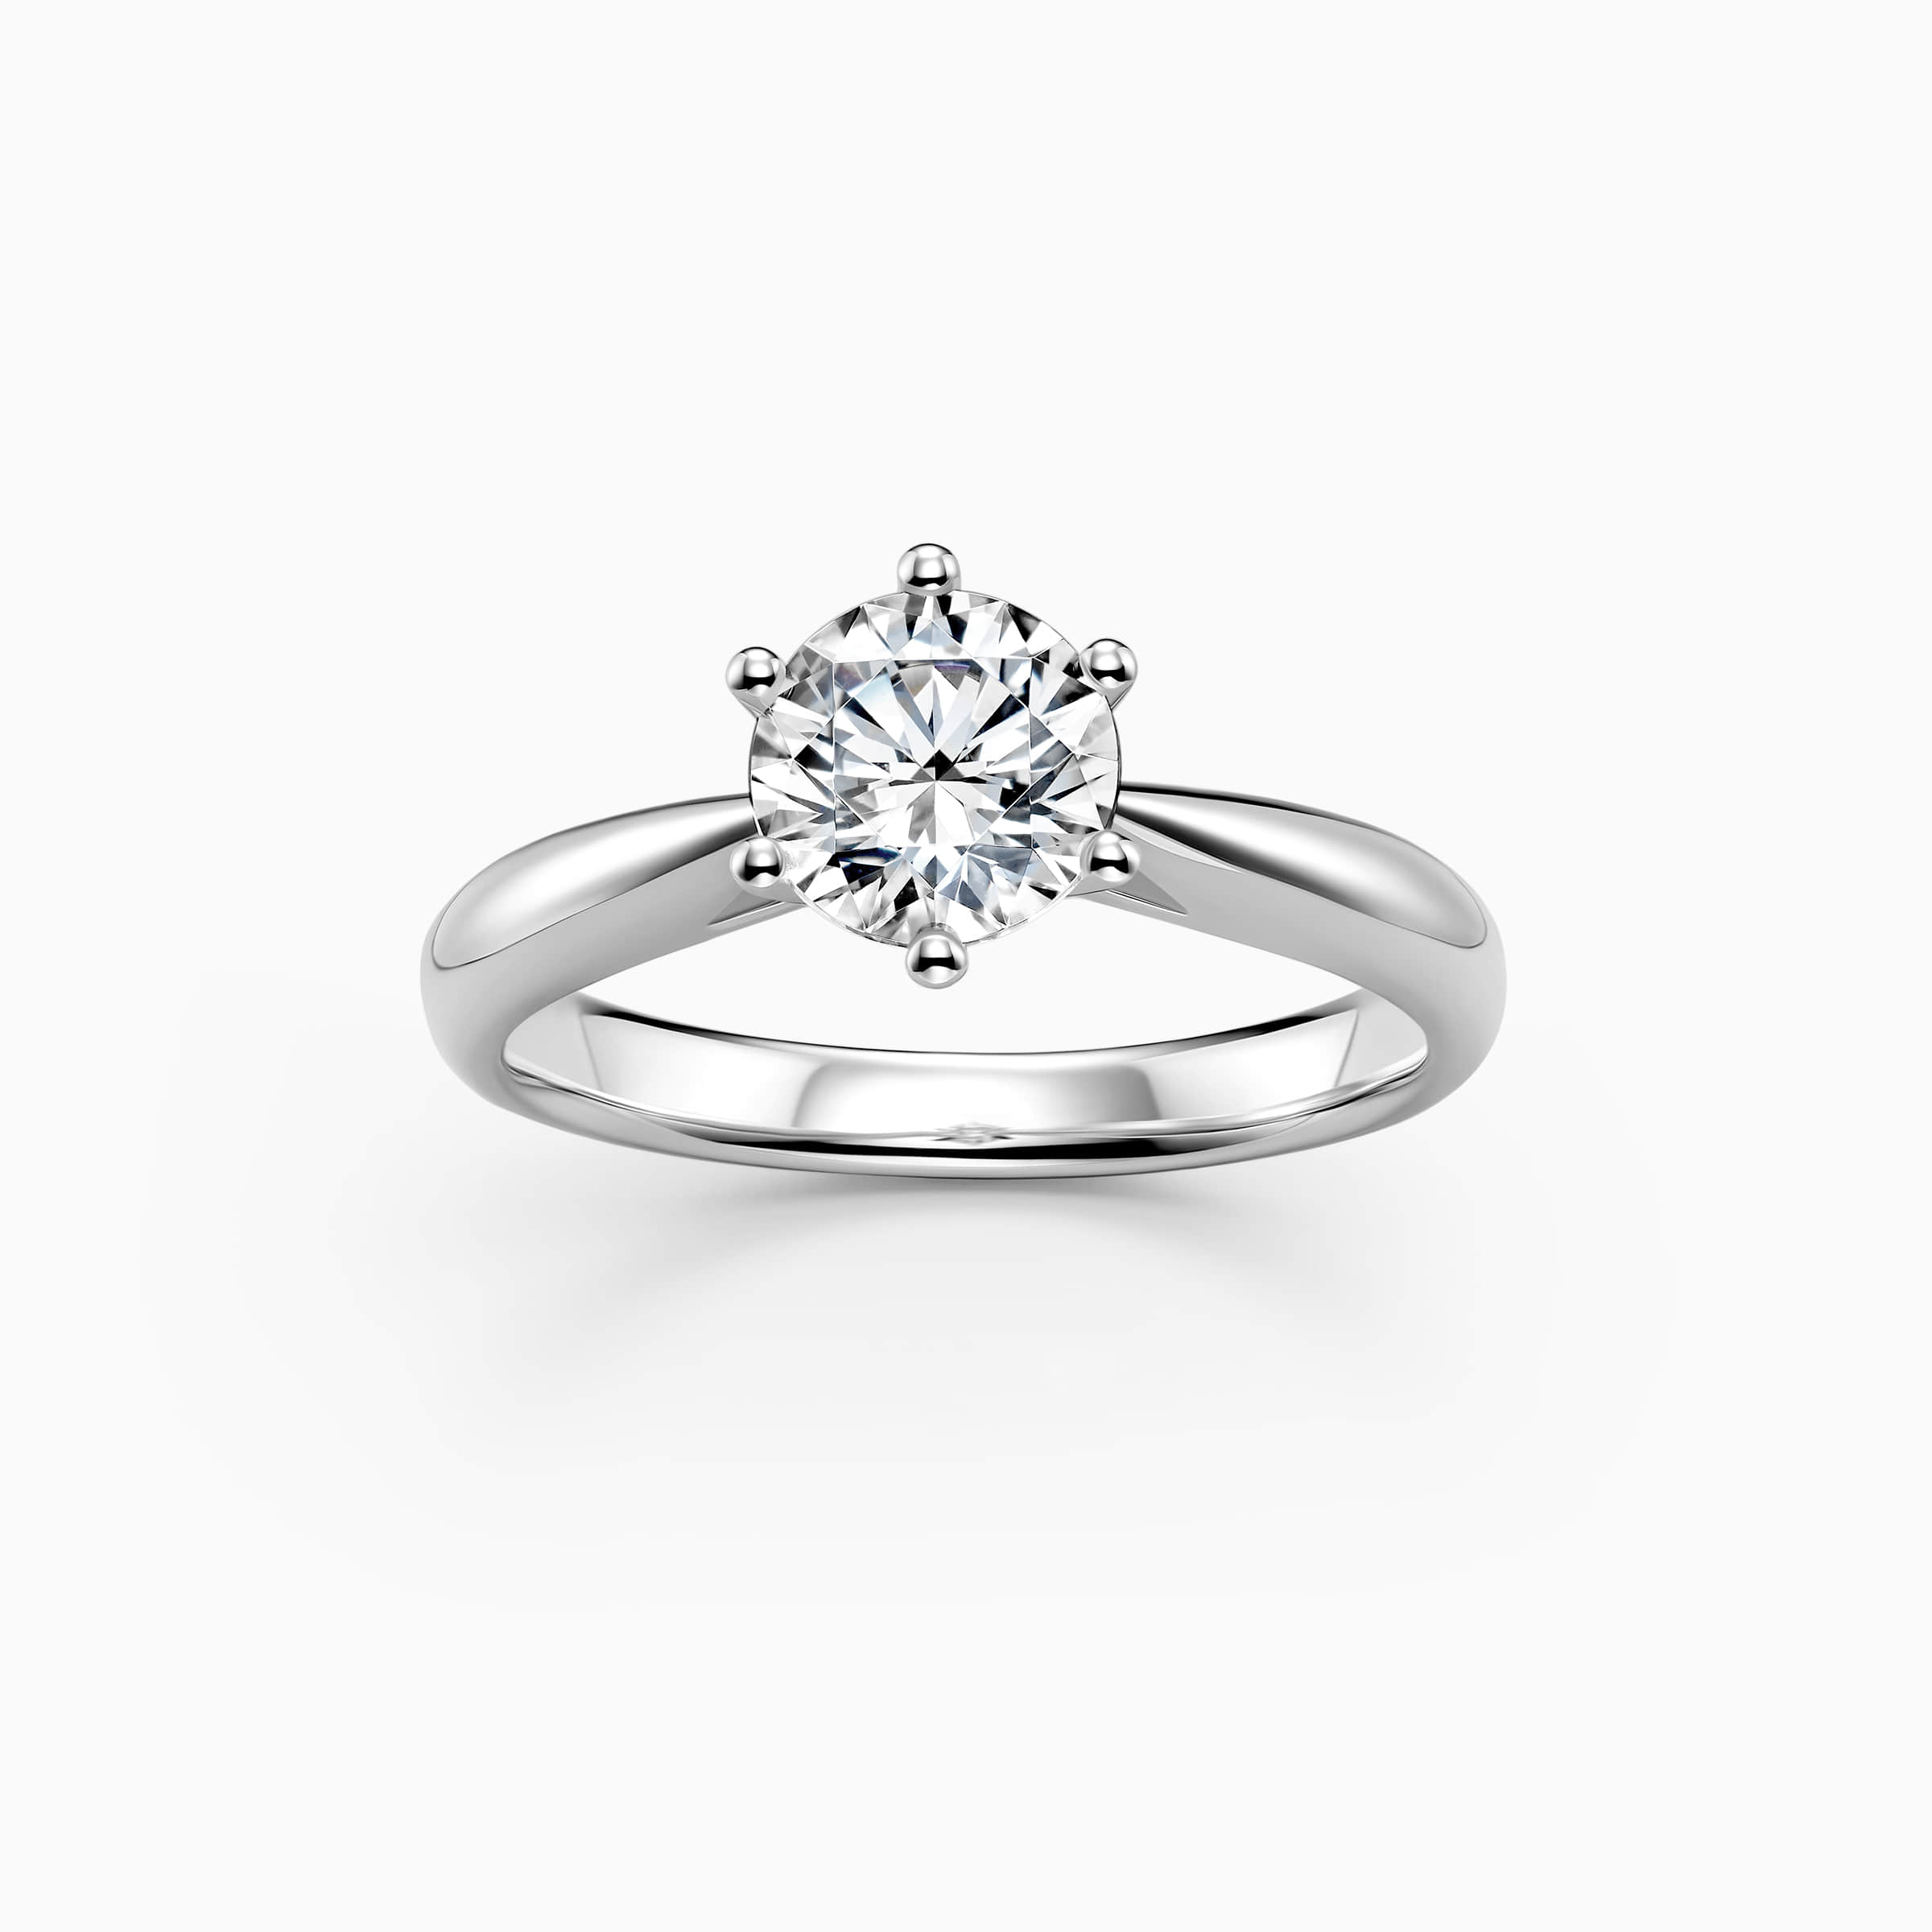 DR forevr 6 prong solitaire ring